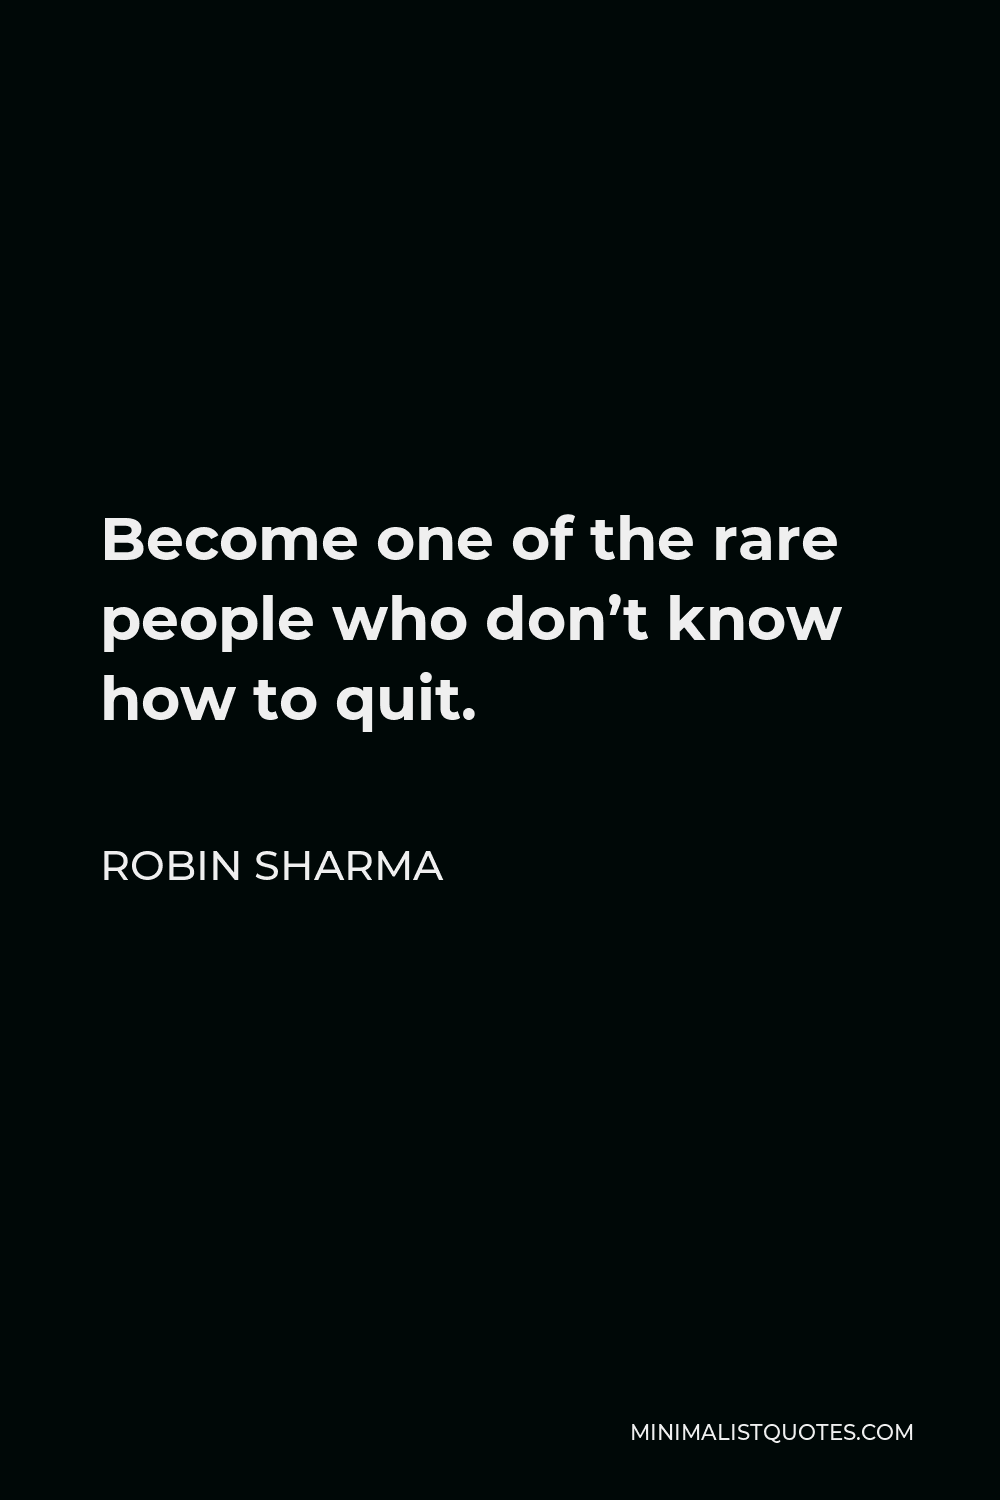 Robin Sharma Quote - Become one of the rare people who don’t know how to quit.